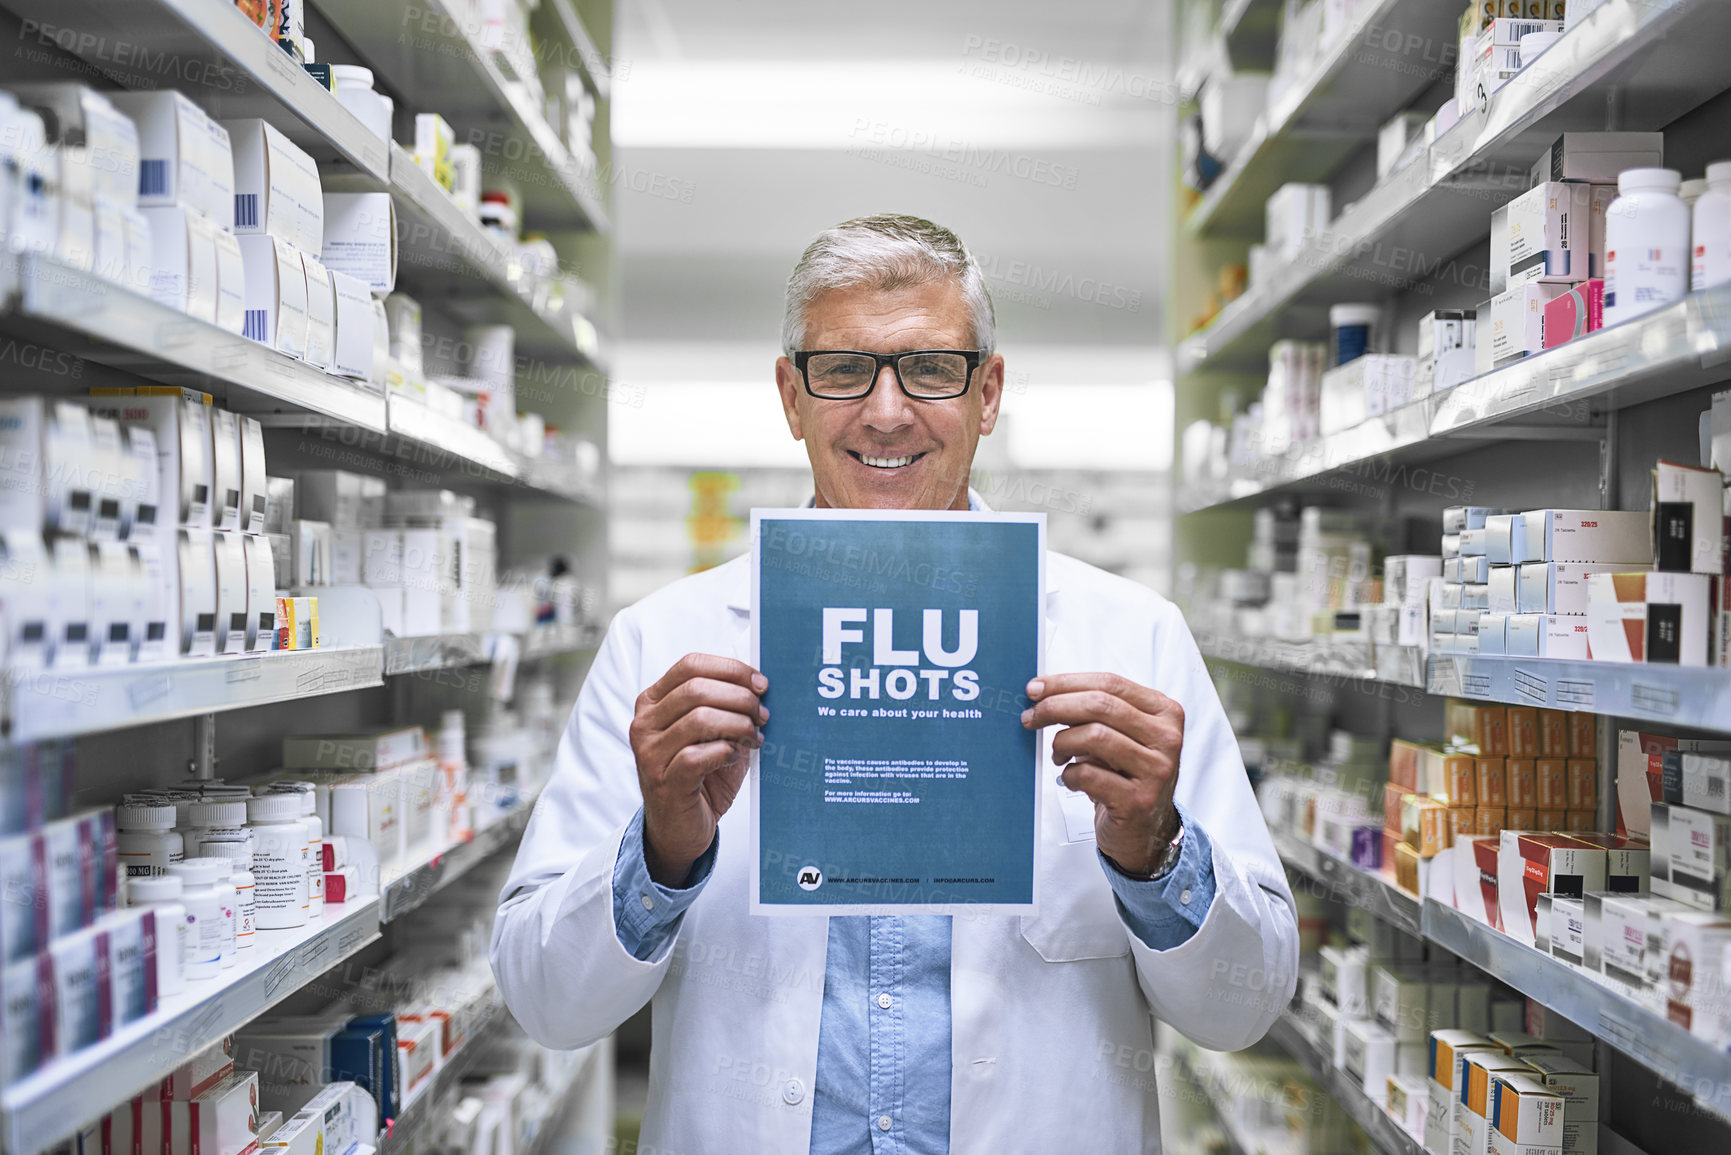 Buy stock photo Portrait of a mature male pharmacist holding up a sign indicating that you can get flu shots there